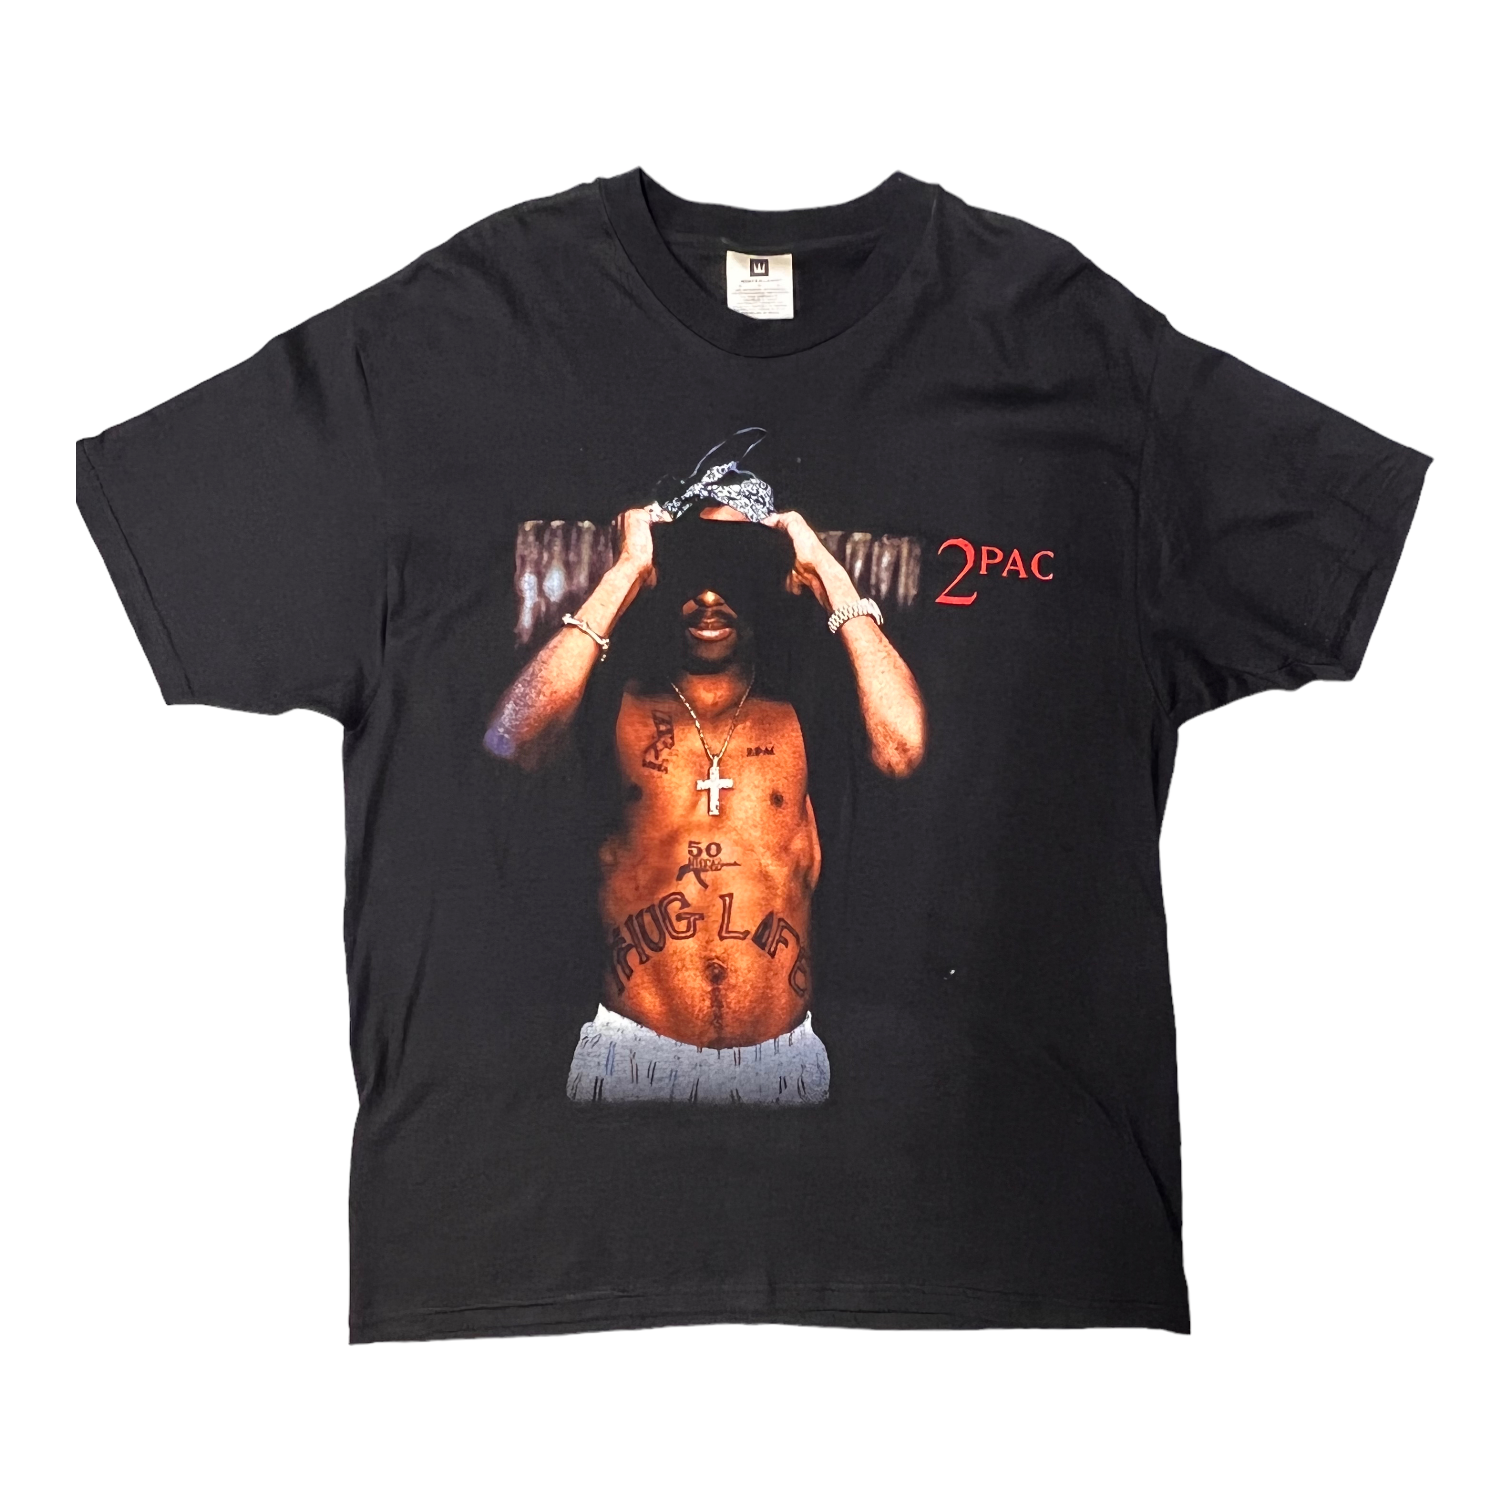 1998 Tupac “All eyes on me” rap tee – The Pop up shop Los Angeles